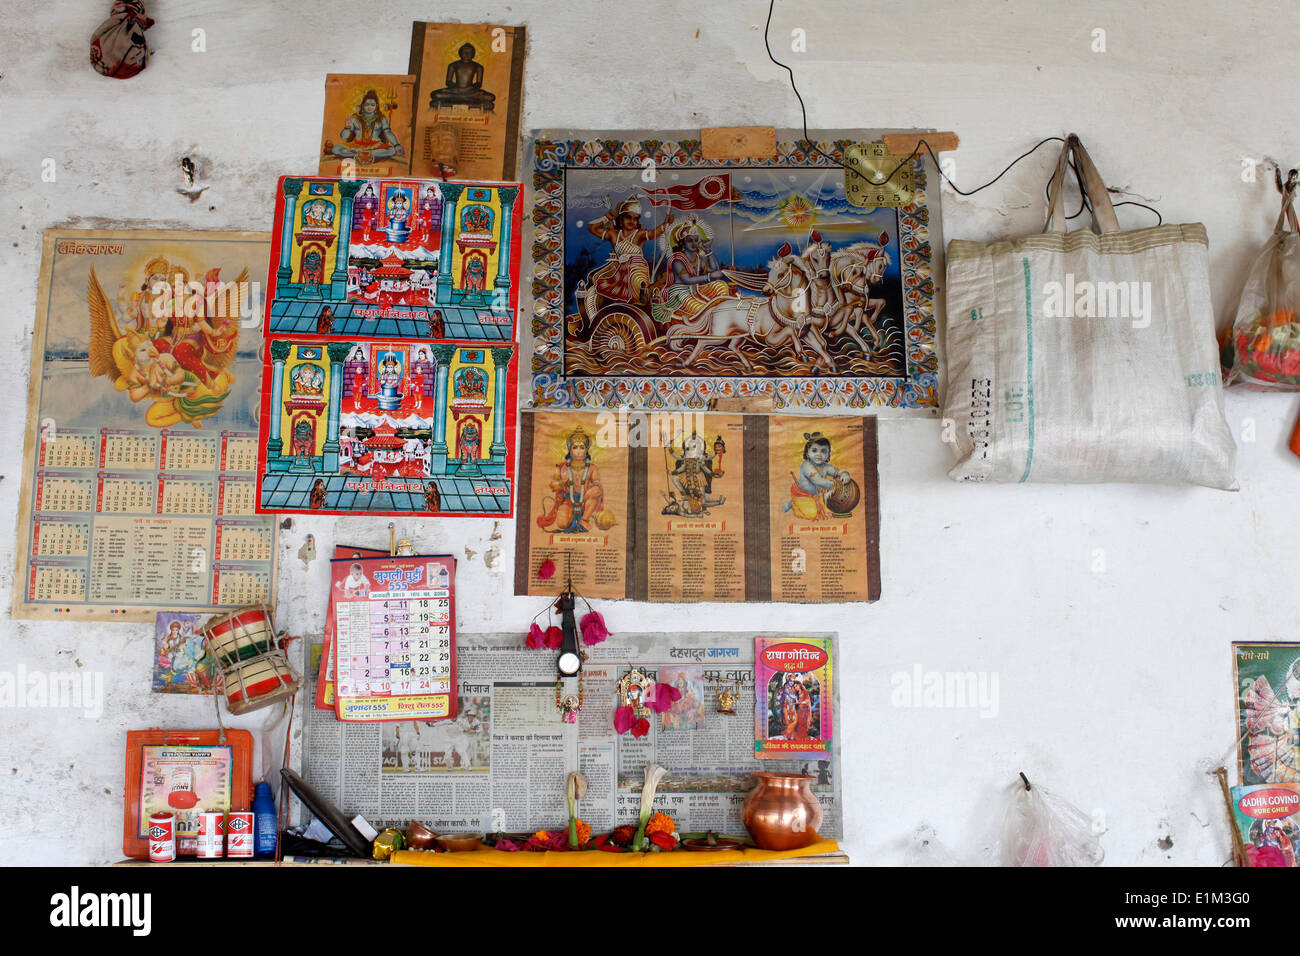 Wall decoration in a sadhus' resting place Stock Photo